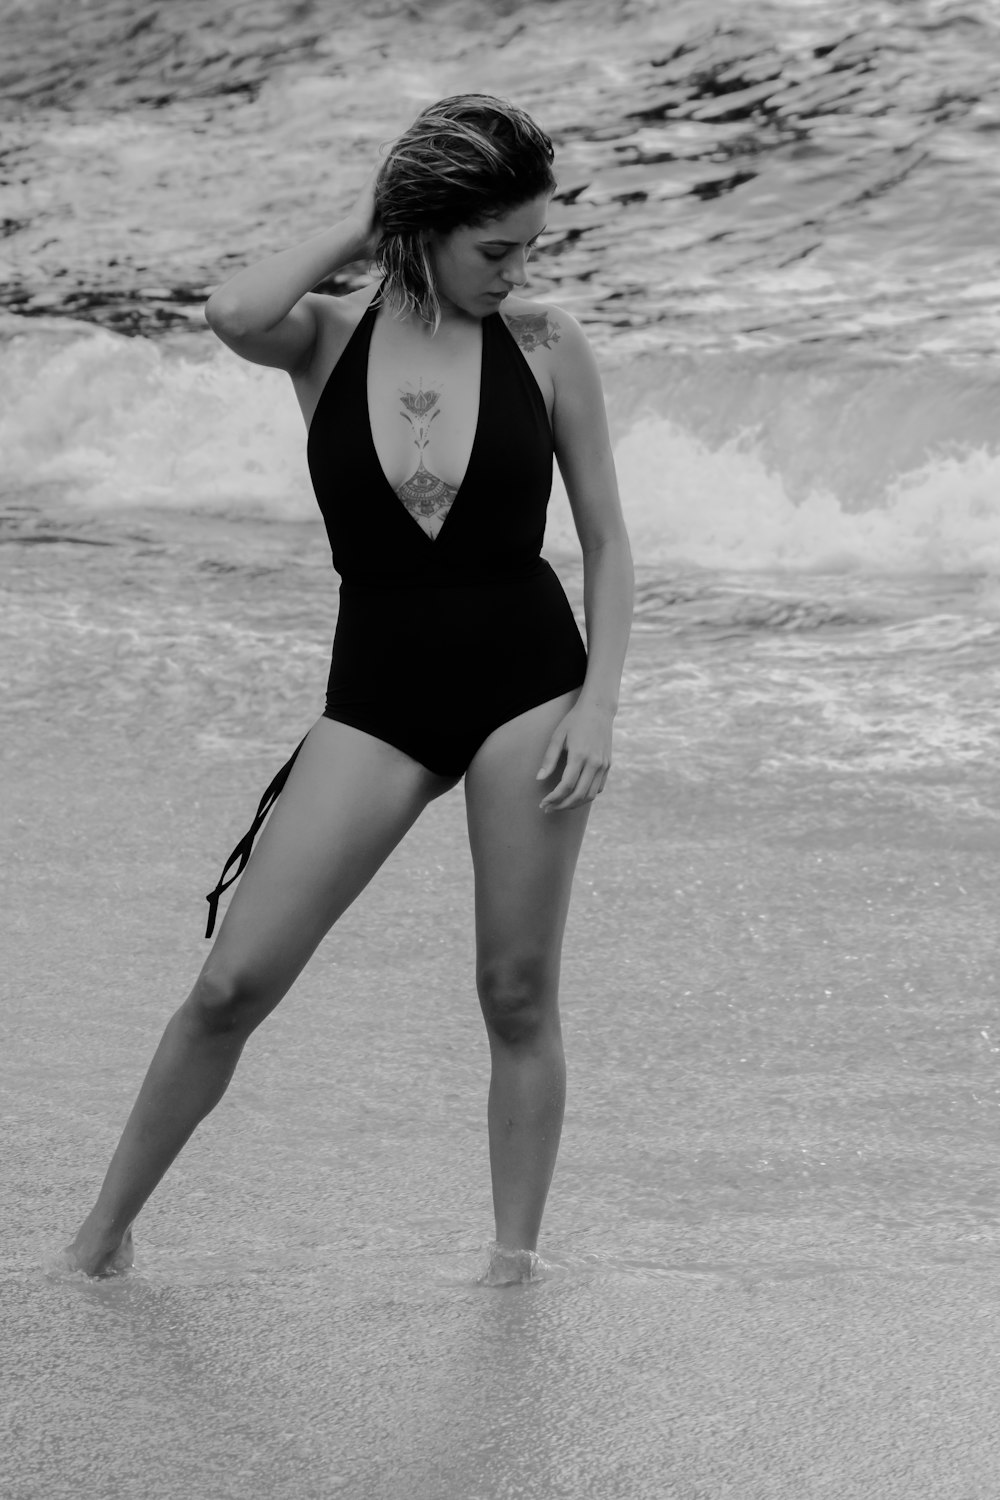 woman in black one piece swimsuit standing on beach shore